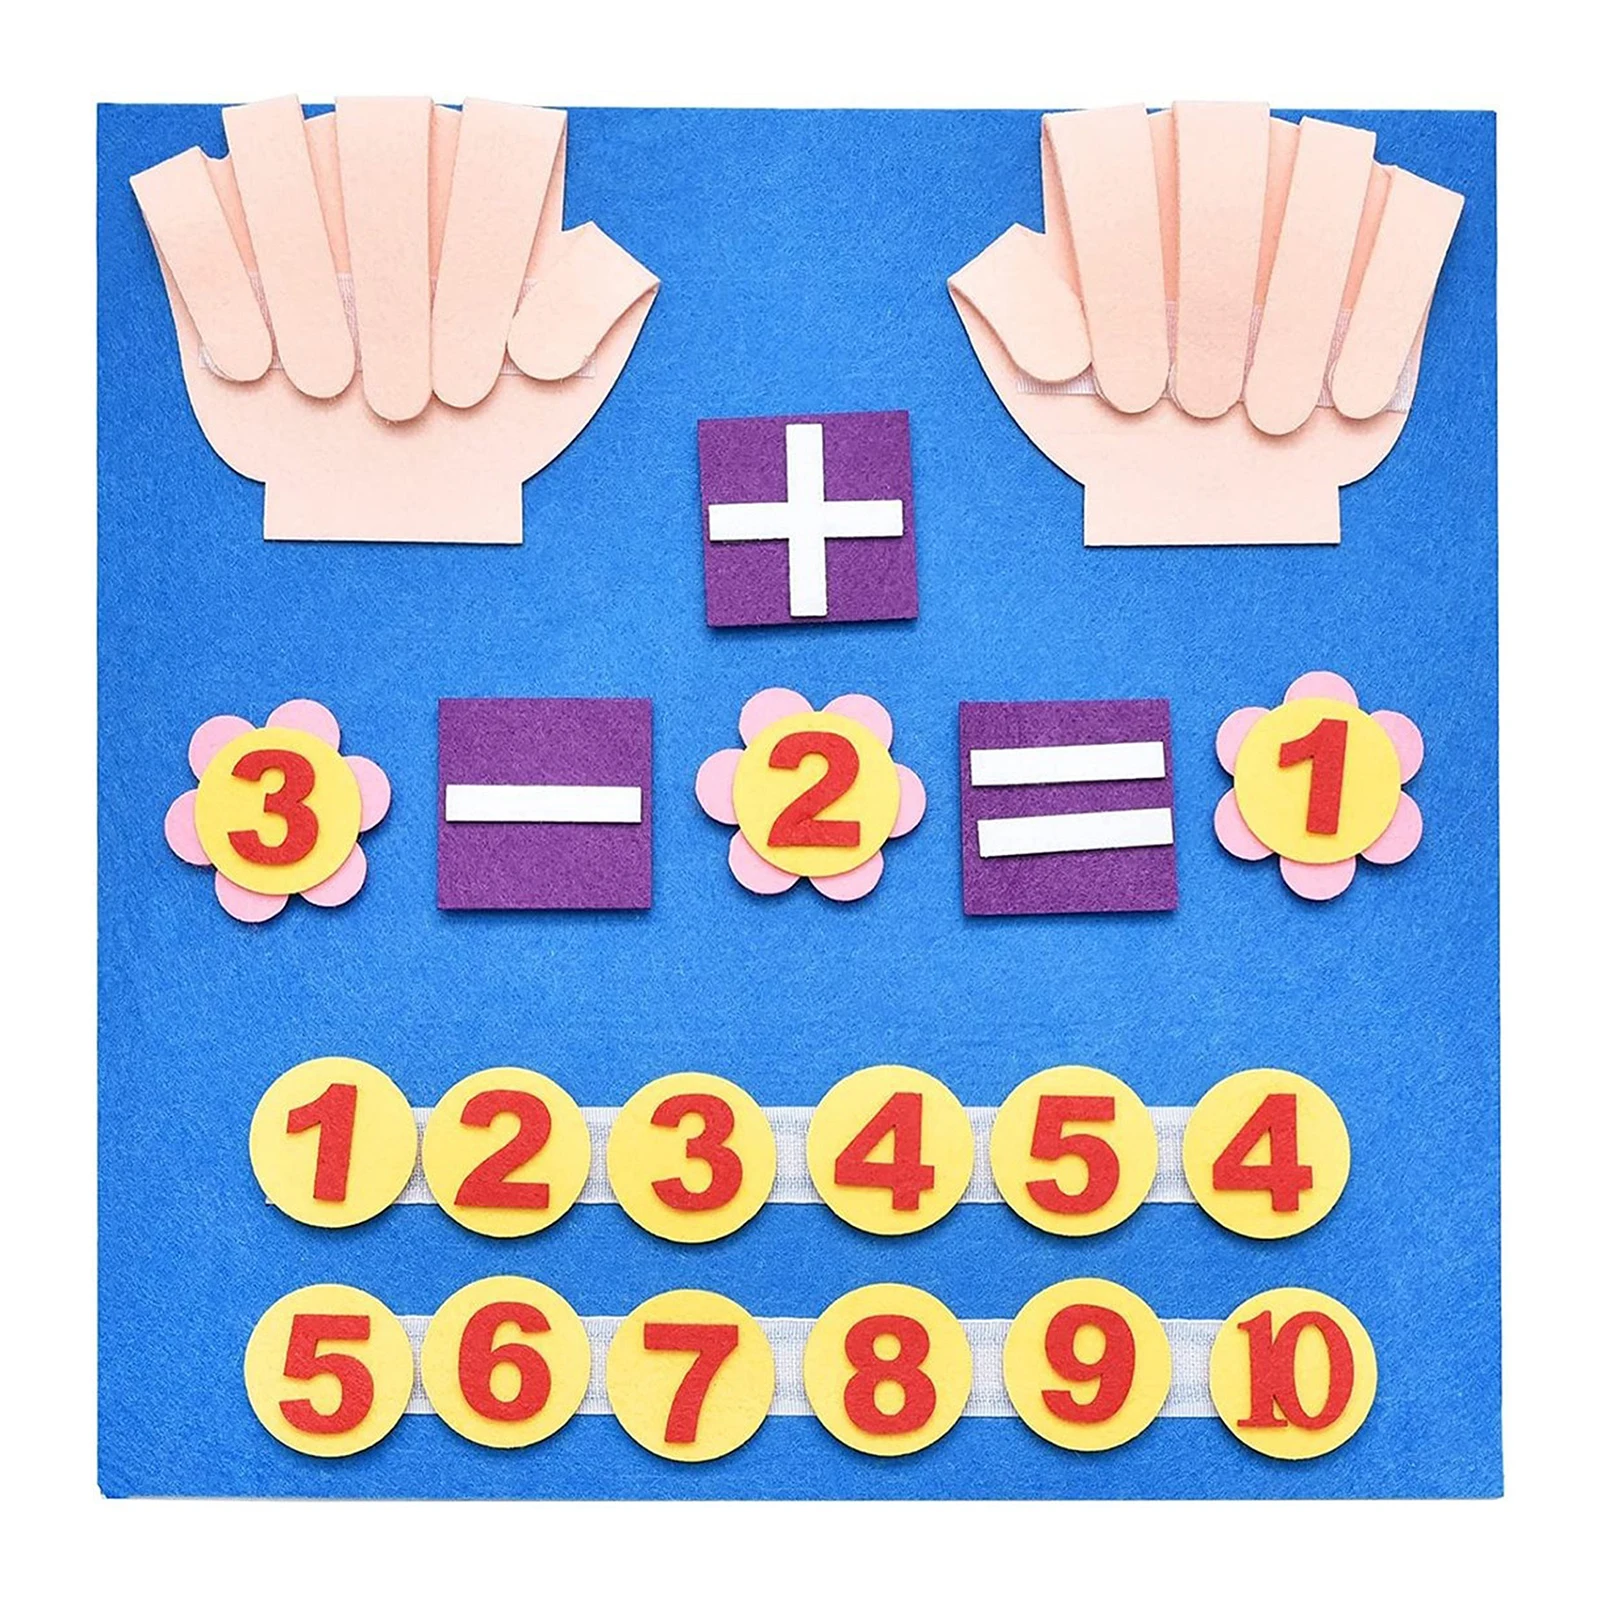 

Felt Board Finger Numbers Counting Toy Teaching Felt Board For Toddlers Felt Math Addition And Subtraction Teaching Early